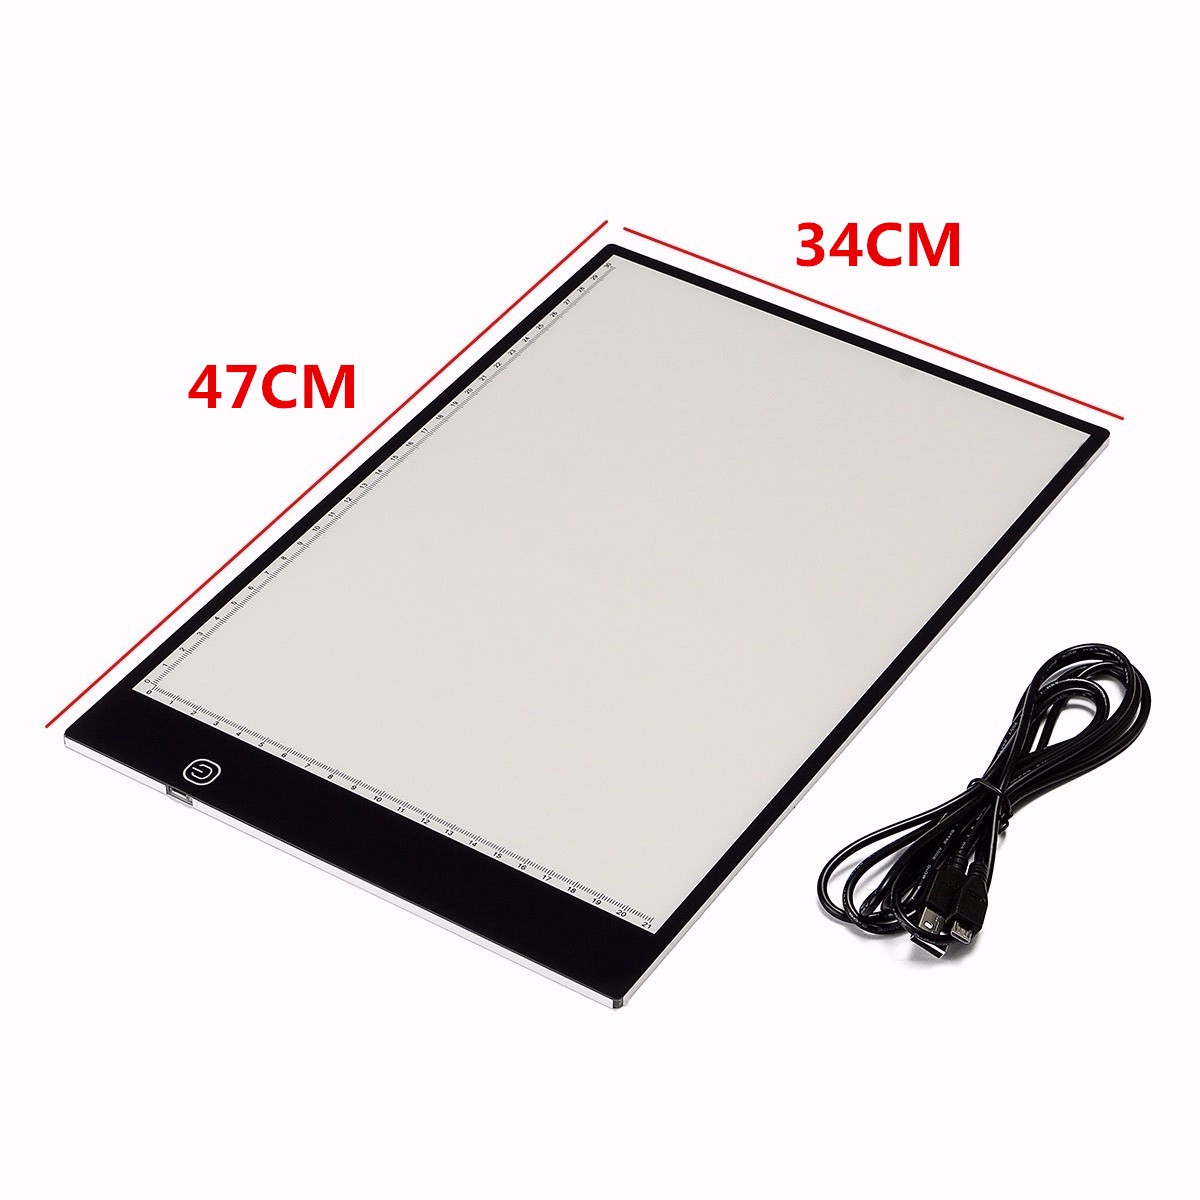 MWay-Ultra-Thin-A3-LED-Copy-With-USB-Cable-Adjustable-Brightness-Drawing-Pad-Tracing-Copy-Board-1345159